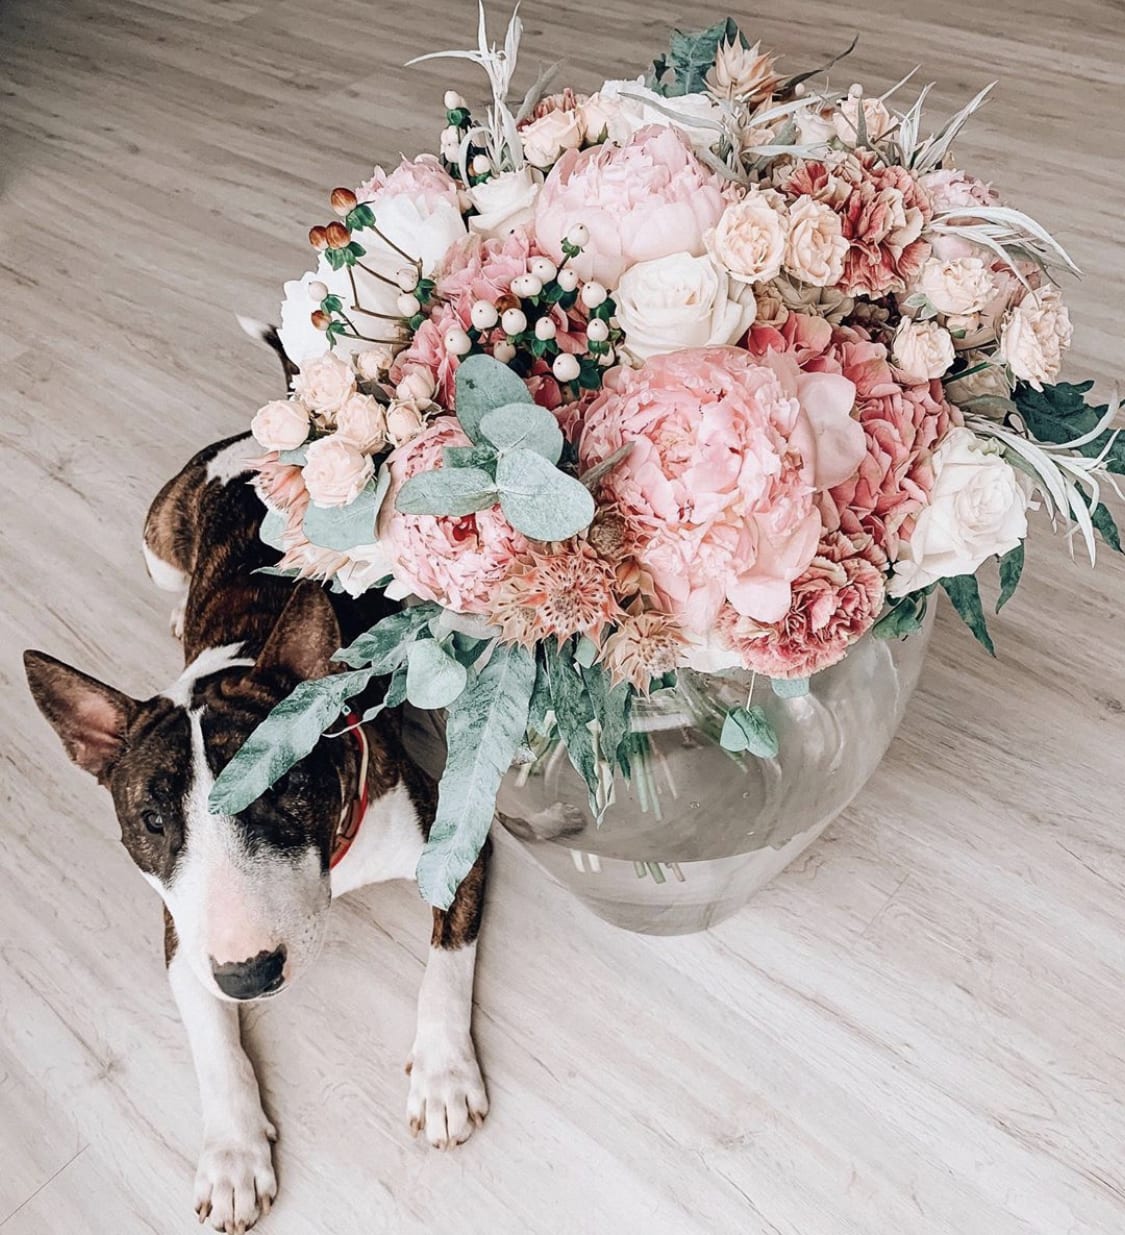 A Bull Terrier lying on the floor next to the bouquet of pink flowers on a vase